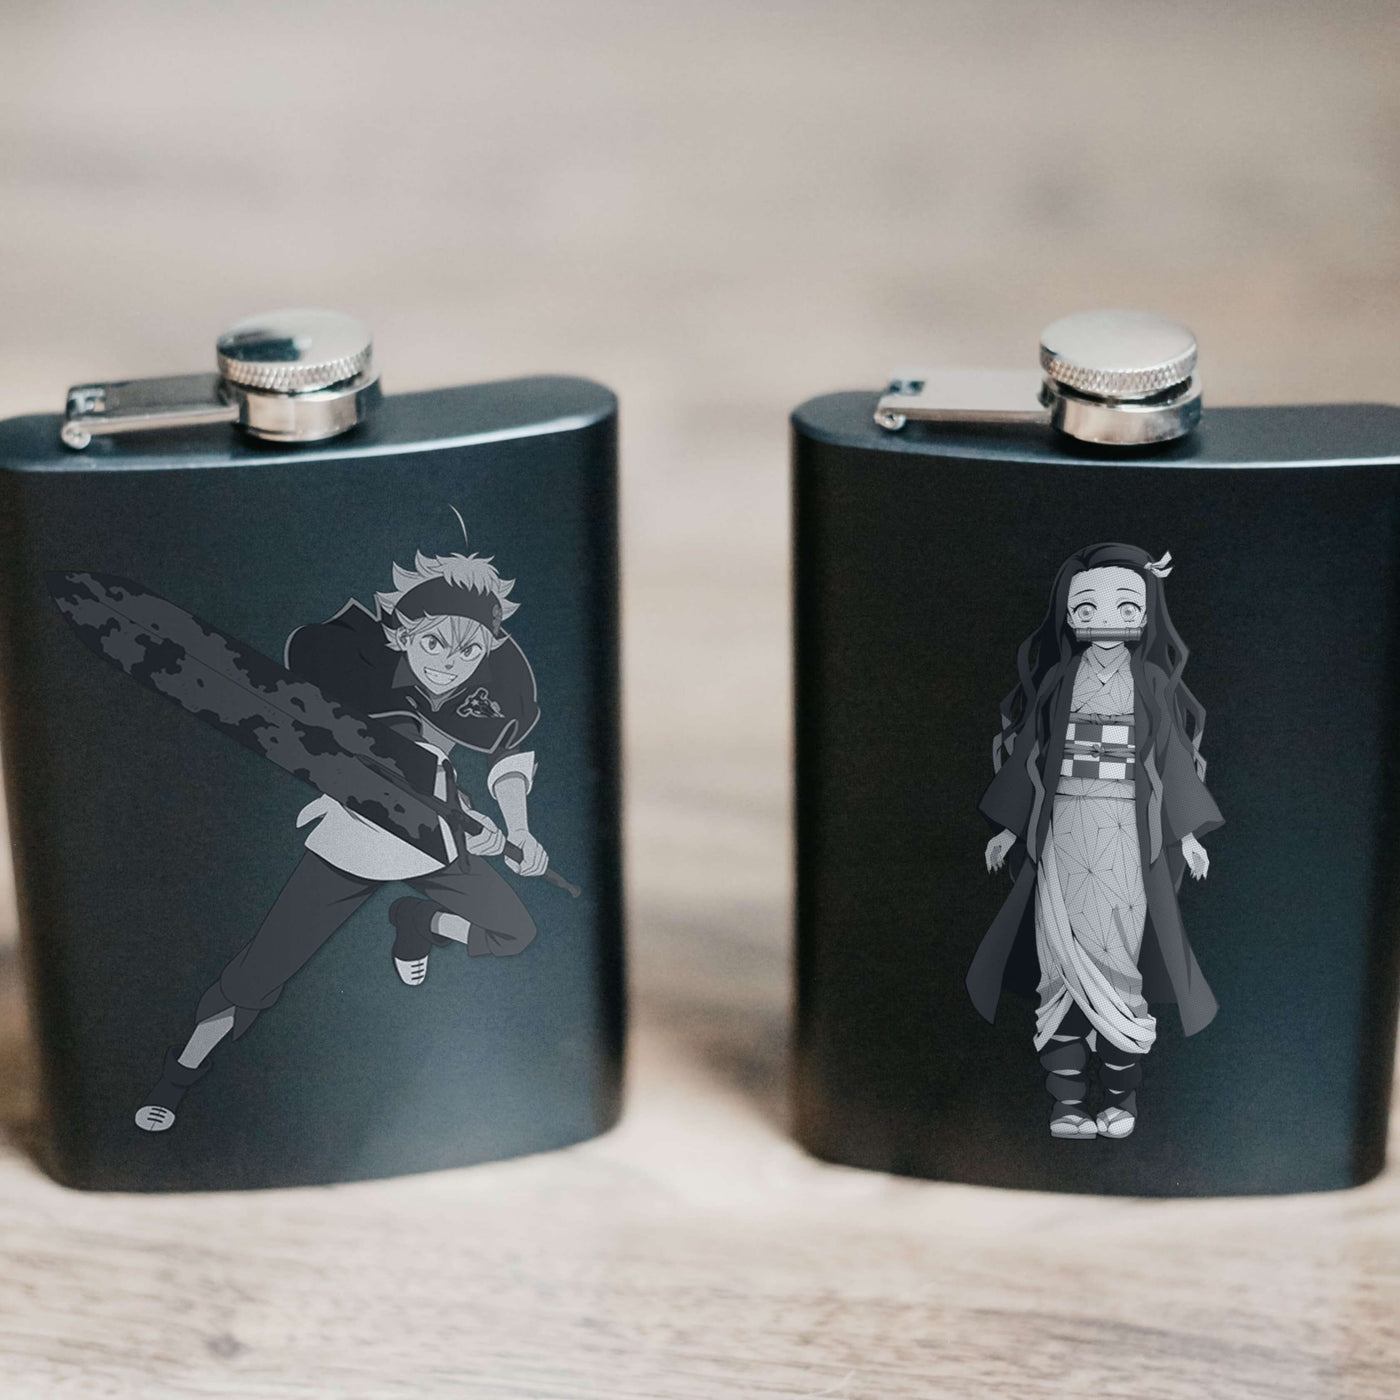 Amazon.com | Anime Japanese Animation L7 Silver Stainless Steel 8oz Hip  Flask Alcohol Whiskey Drinking Brandy: Flasks